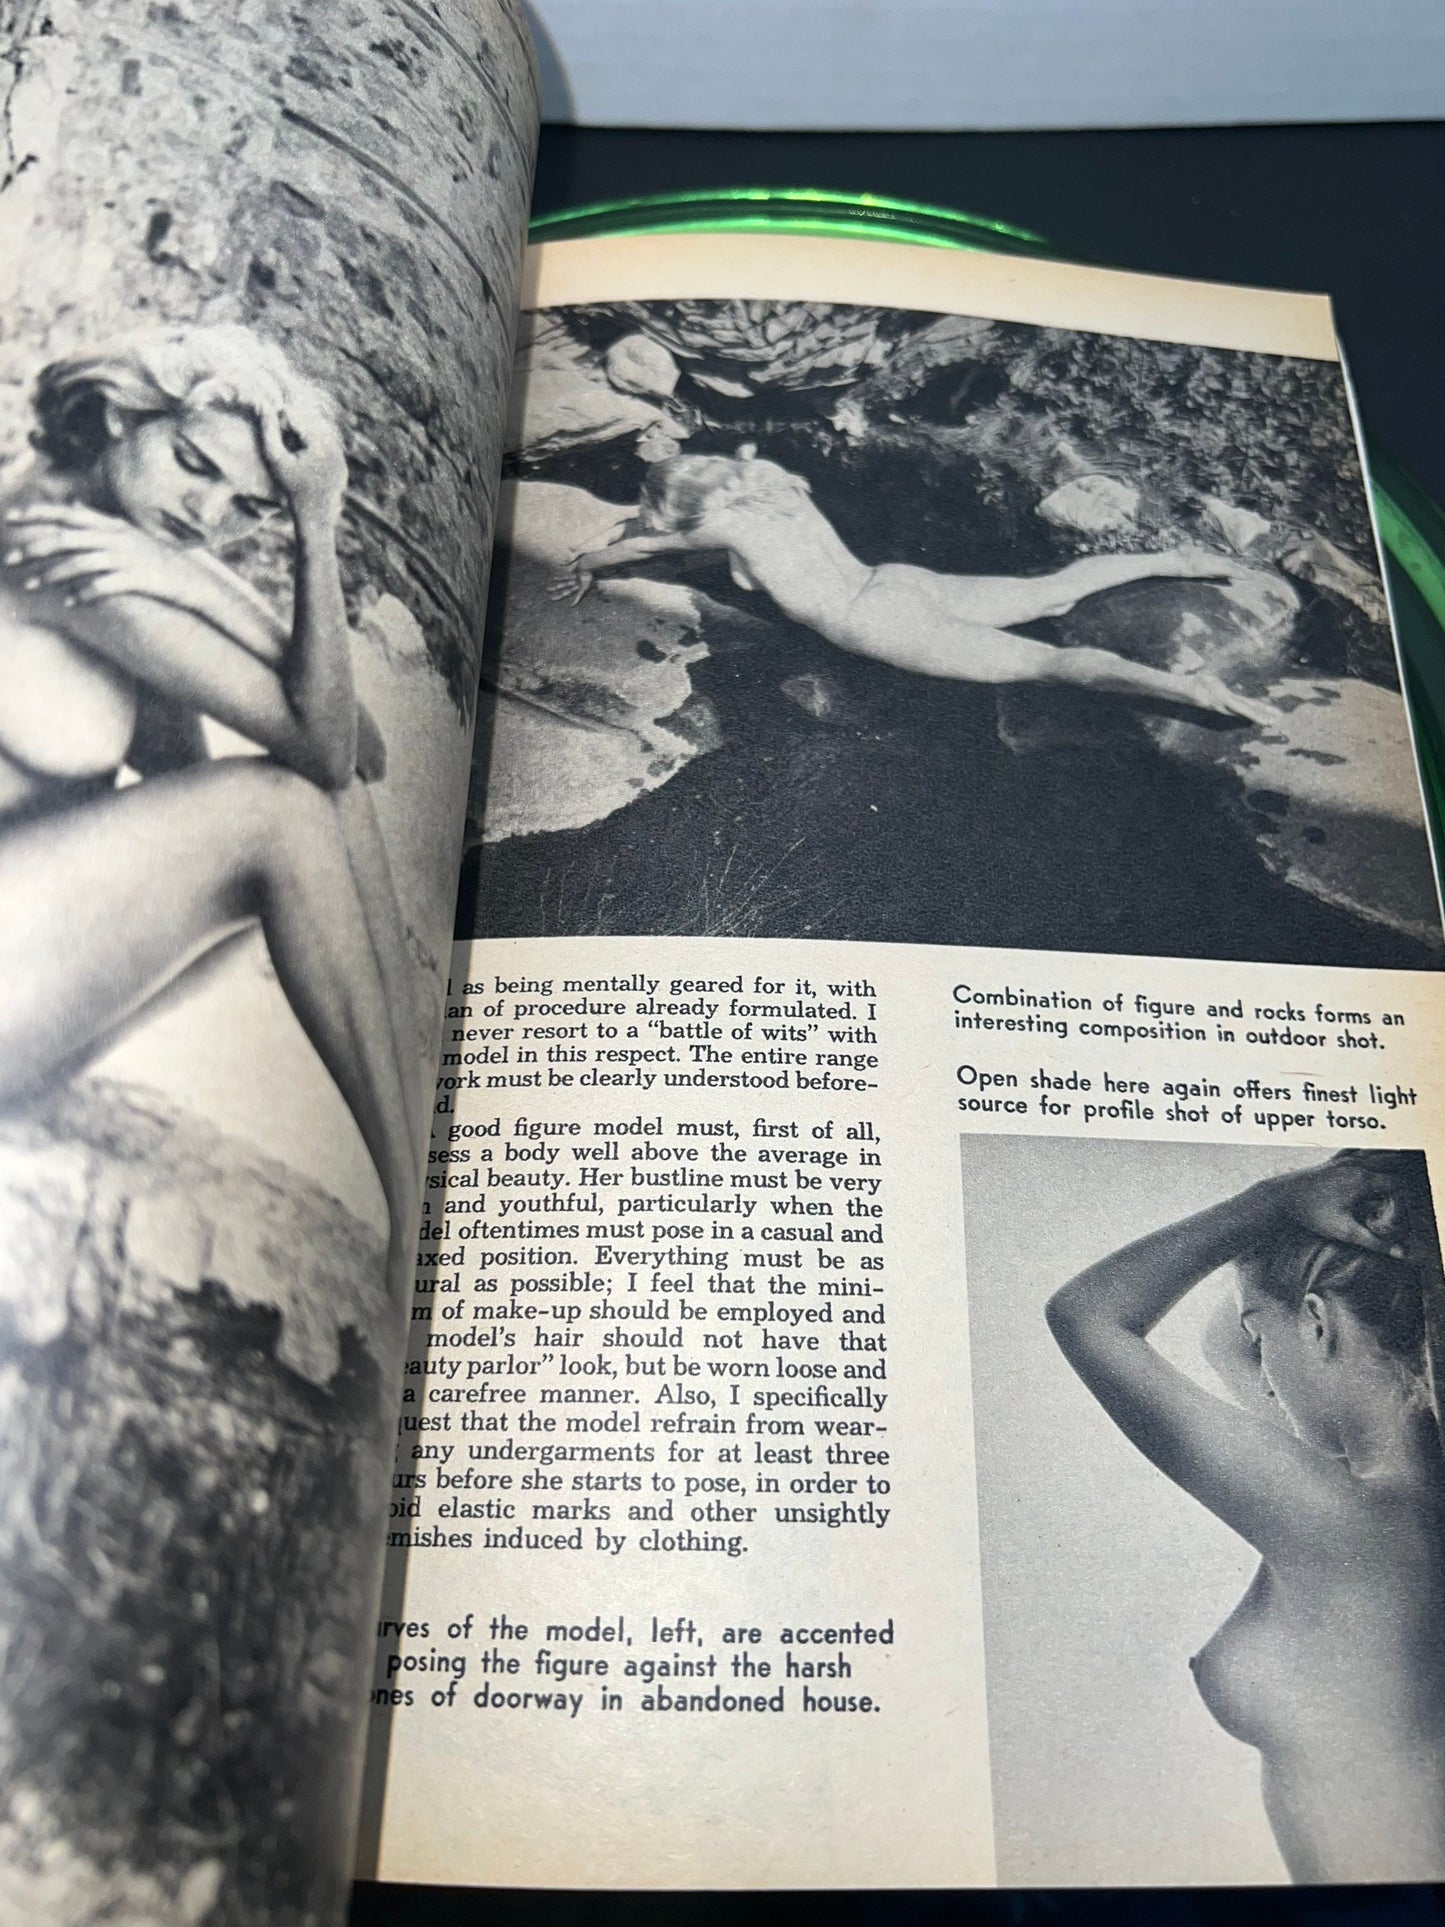 Vintage the glamour camera of Russ Meyer 1958 nudes pin up girls photography